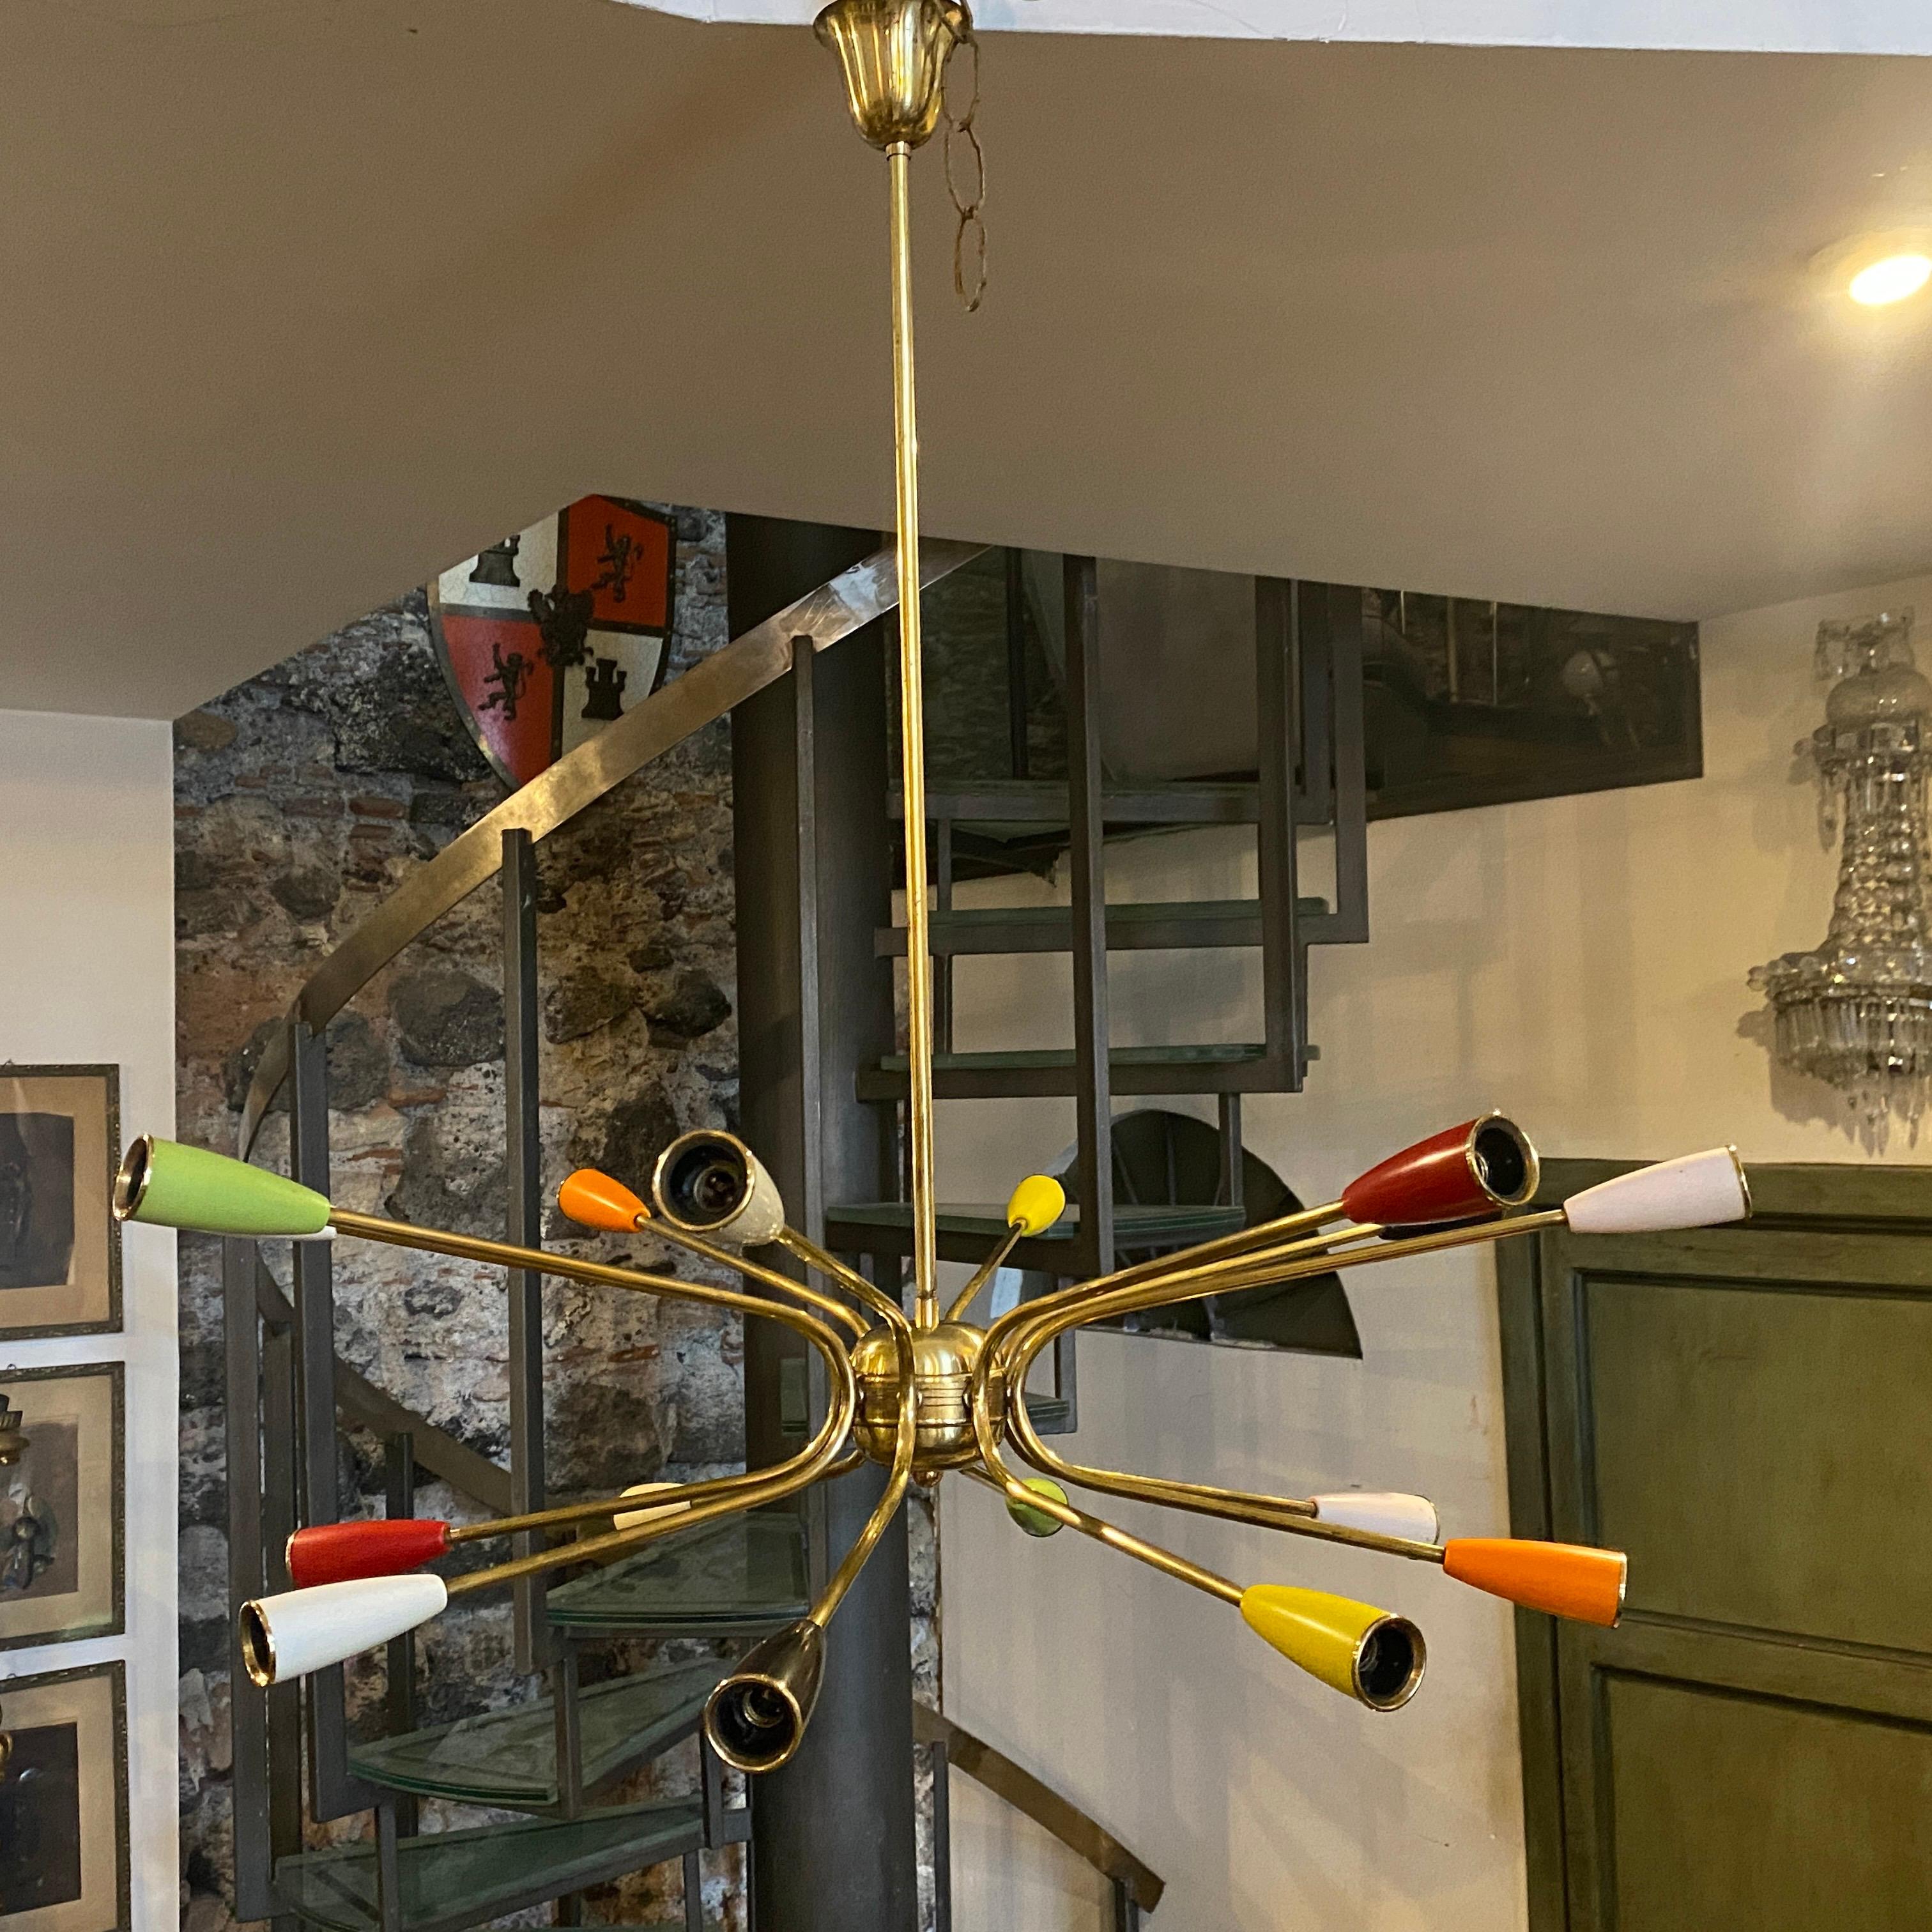 Amazing fully restored original sputnik chandelier made in Italy in the sixties, solid brass has been cleaned, in the last pics you can see the chandelier in original conditions, plastic bulb holders are in original colors. It works 110-240 volts